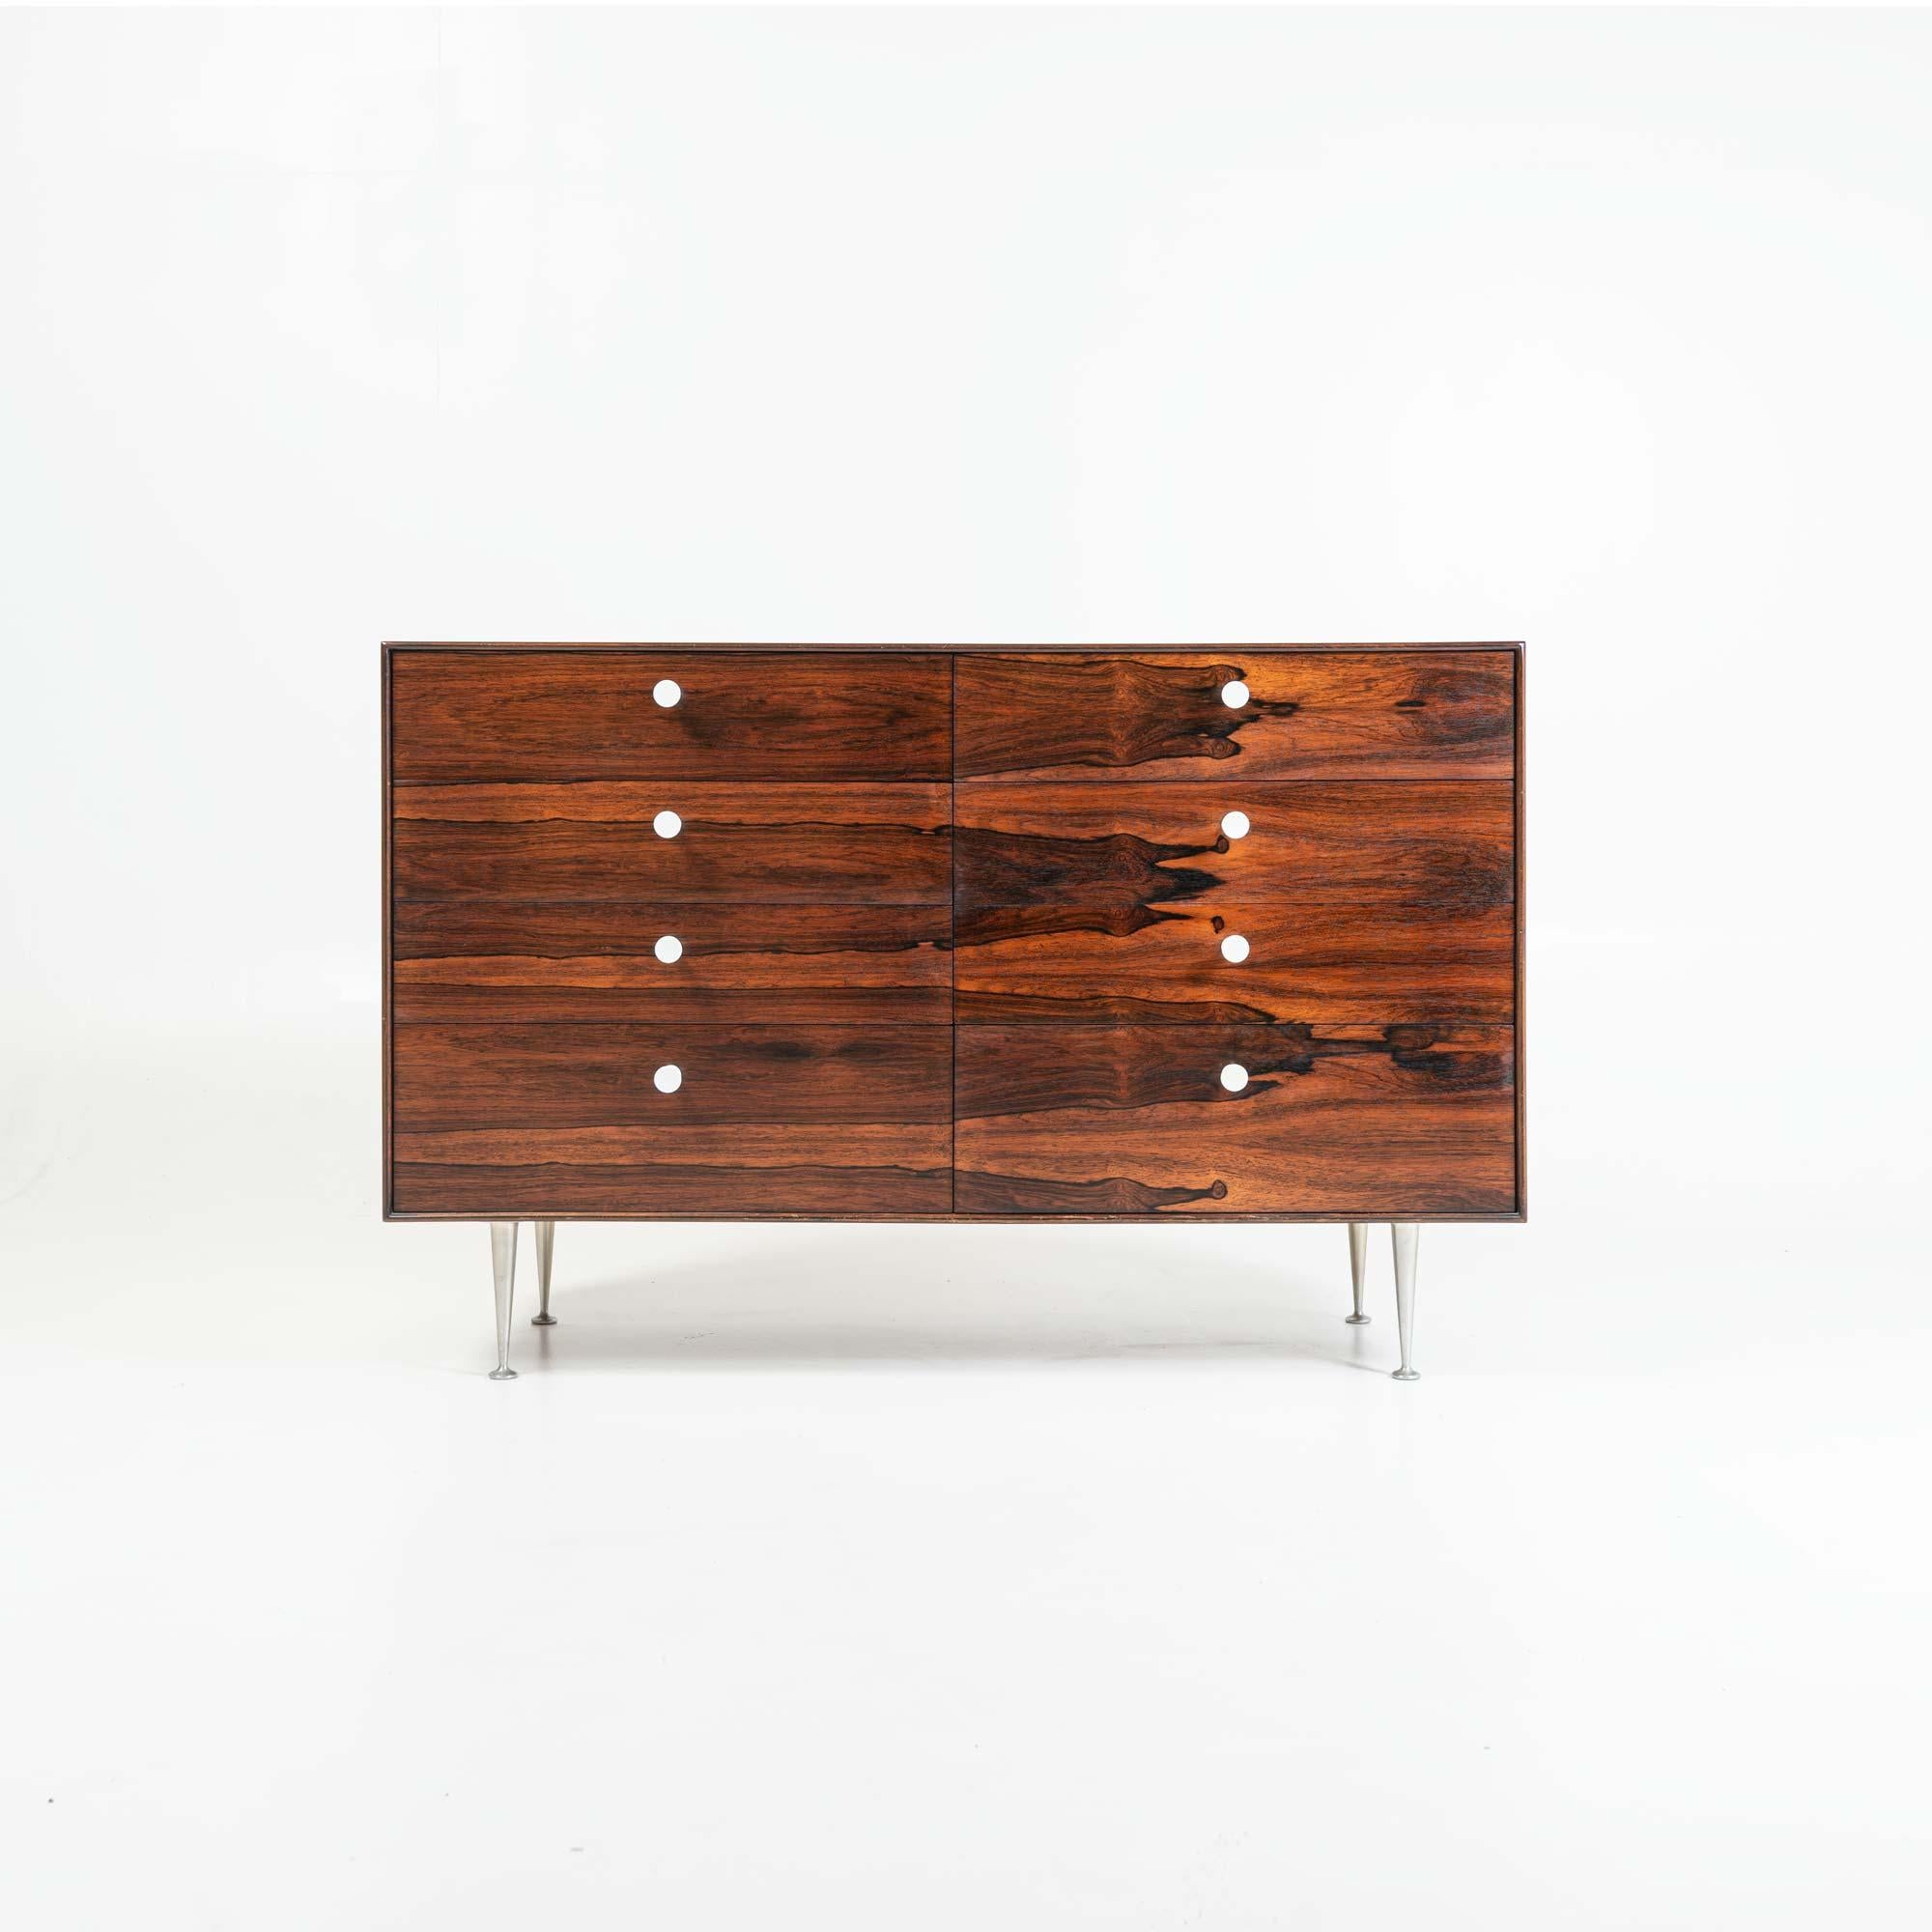 An 8 drawer dresser designed by George Nelson for Herman Miller, in Brazilian rosewood with its original white porcelain pulls and classic Thin Edge aluminum legs. The front drawers display exceptional rosewood grain, with great contrasts.  The